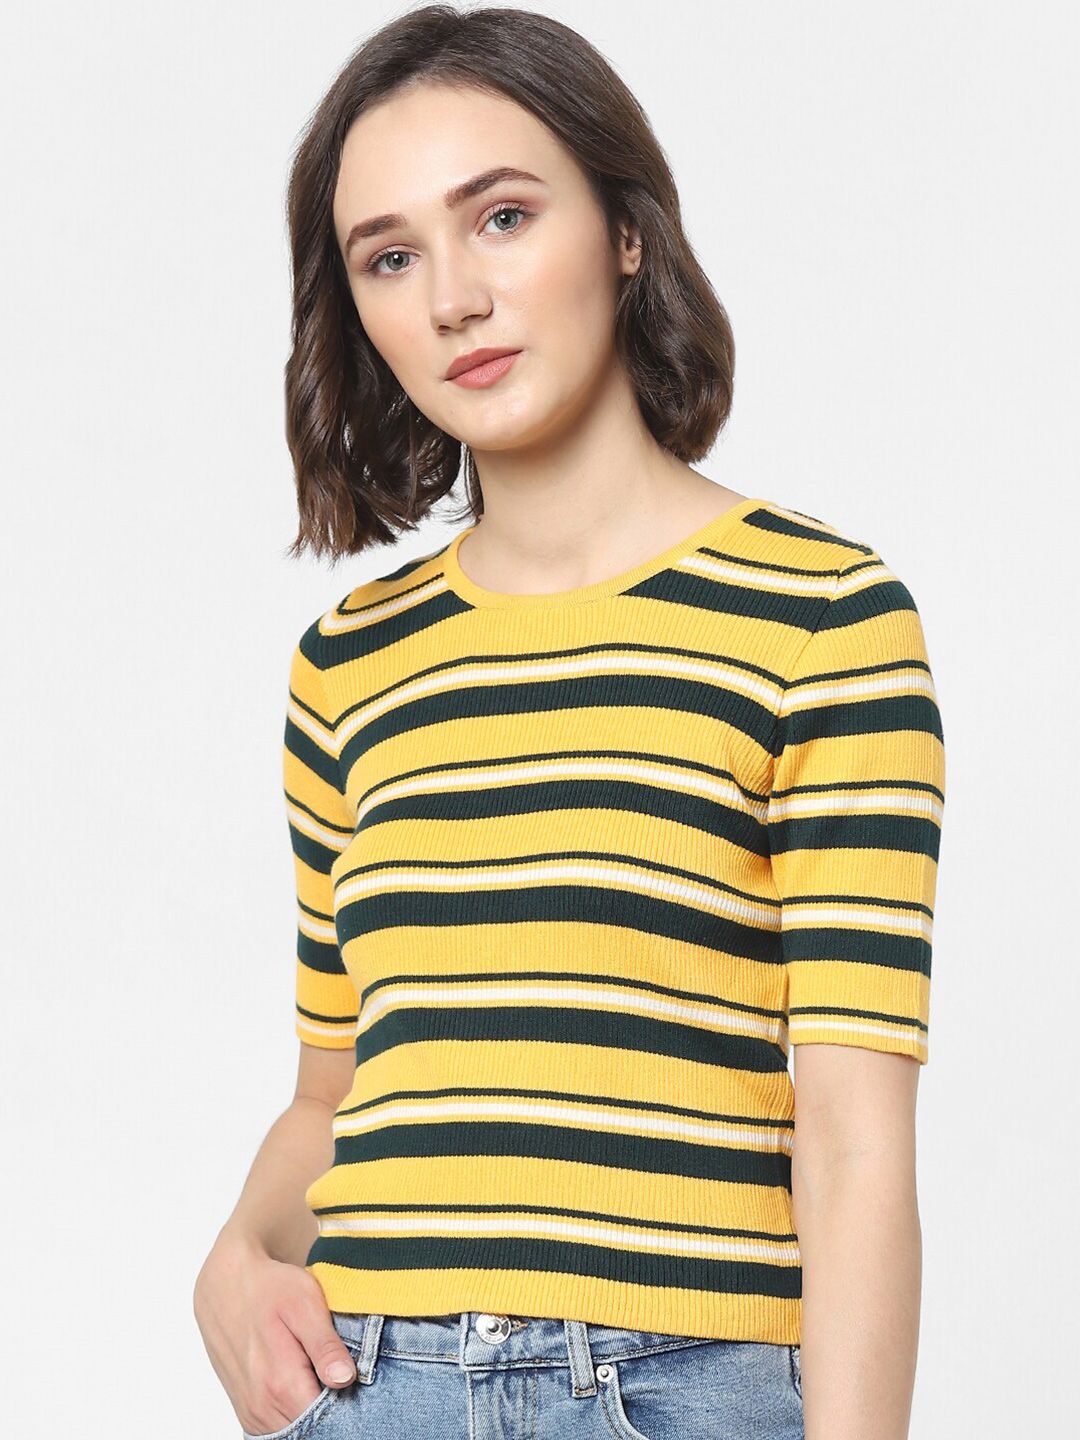 ONLY Women Yellow & Black Striped Cotton Pullover Price in India